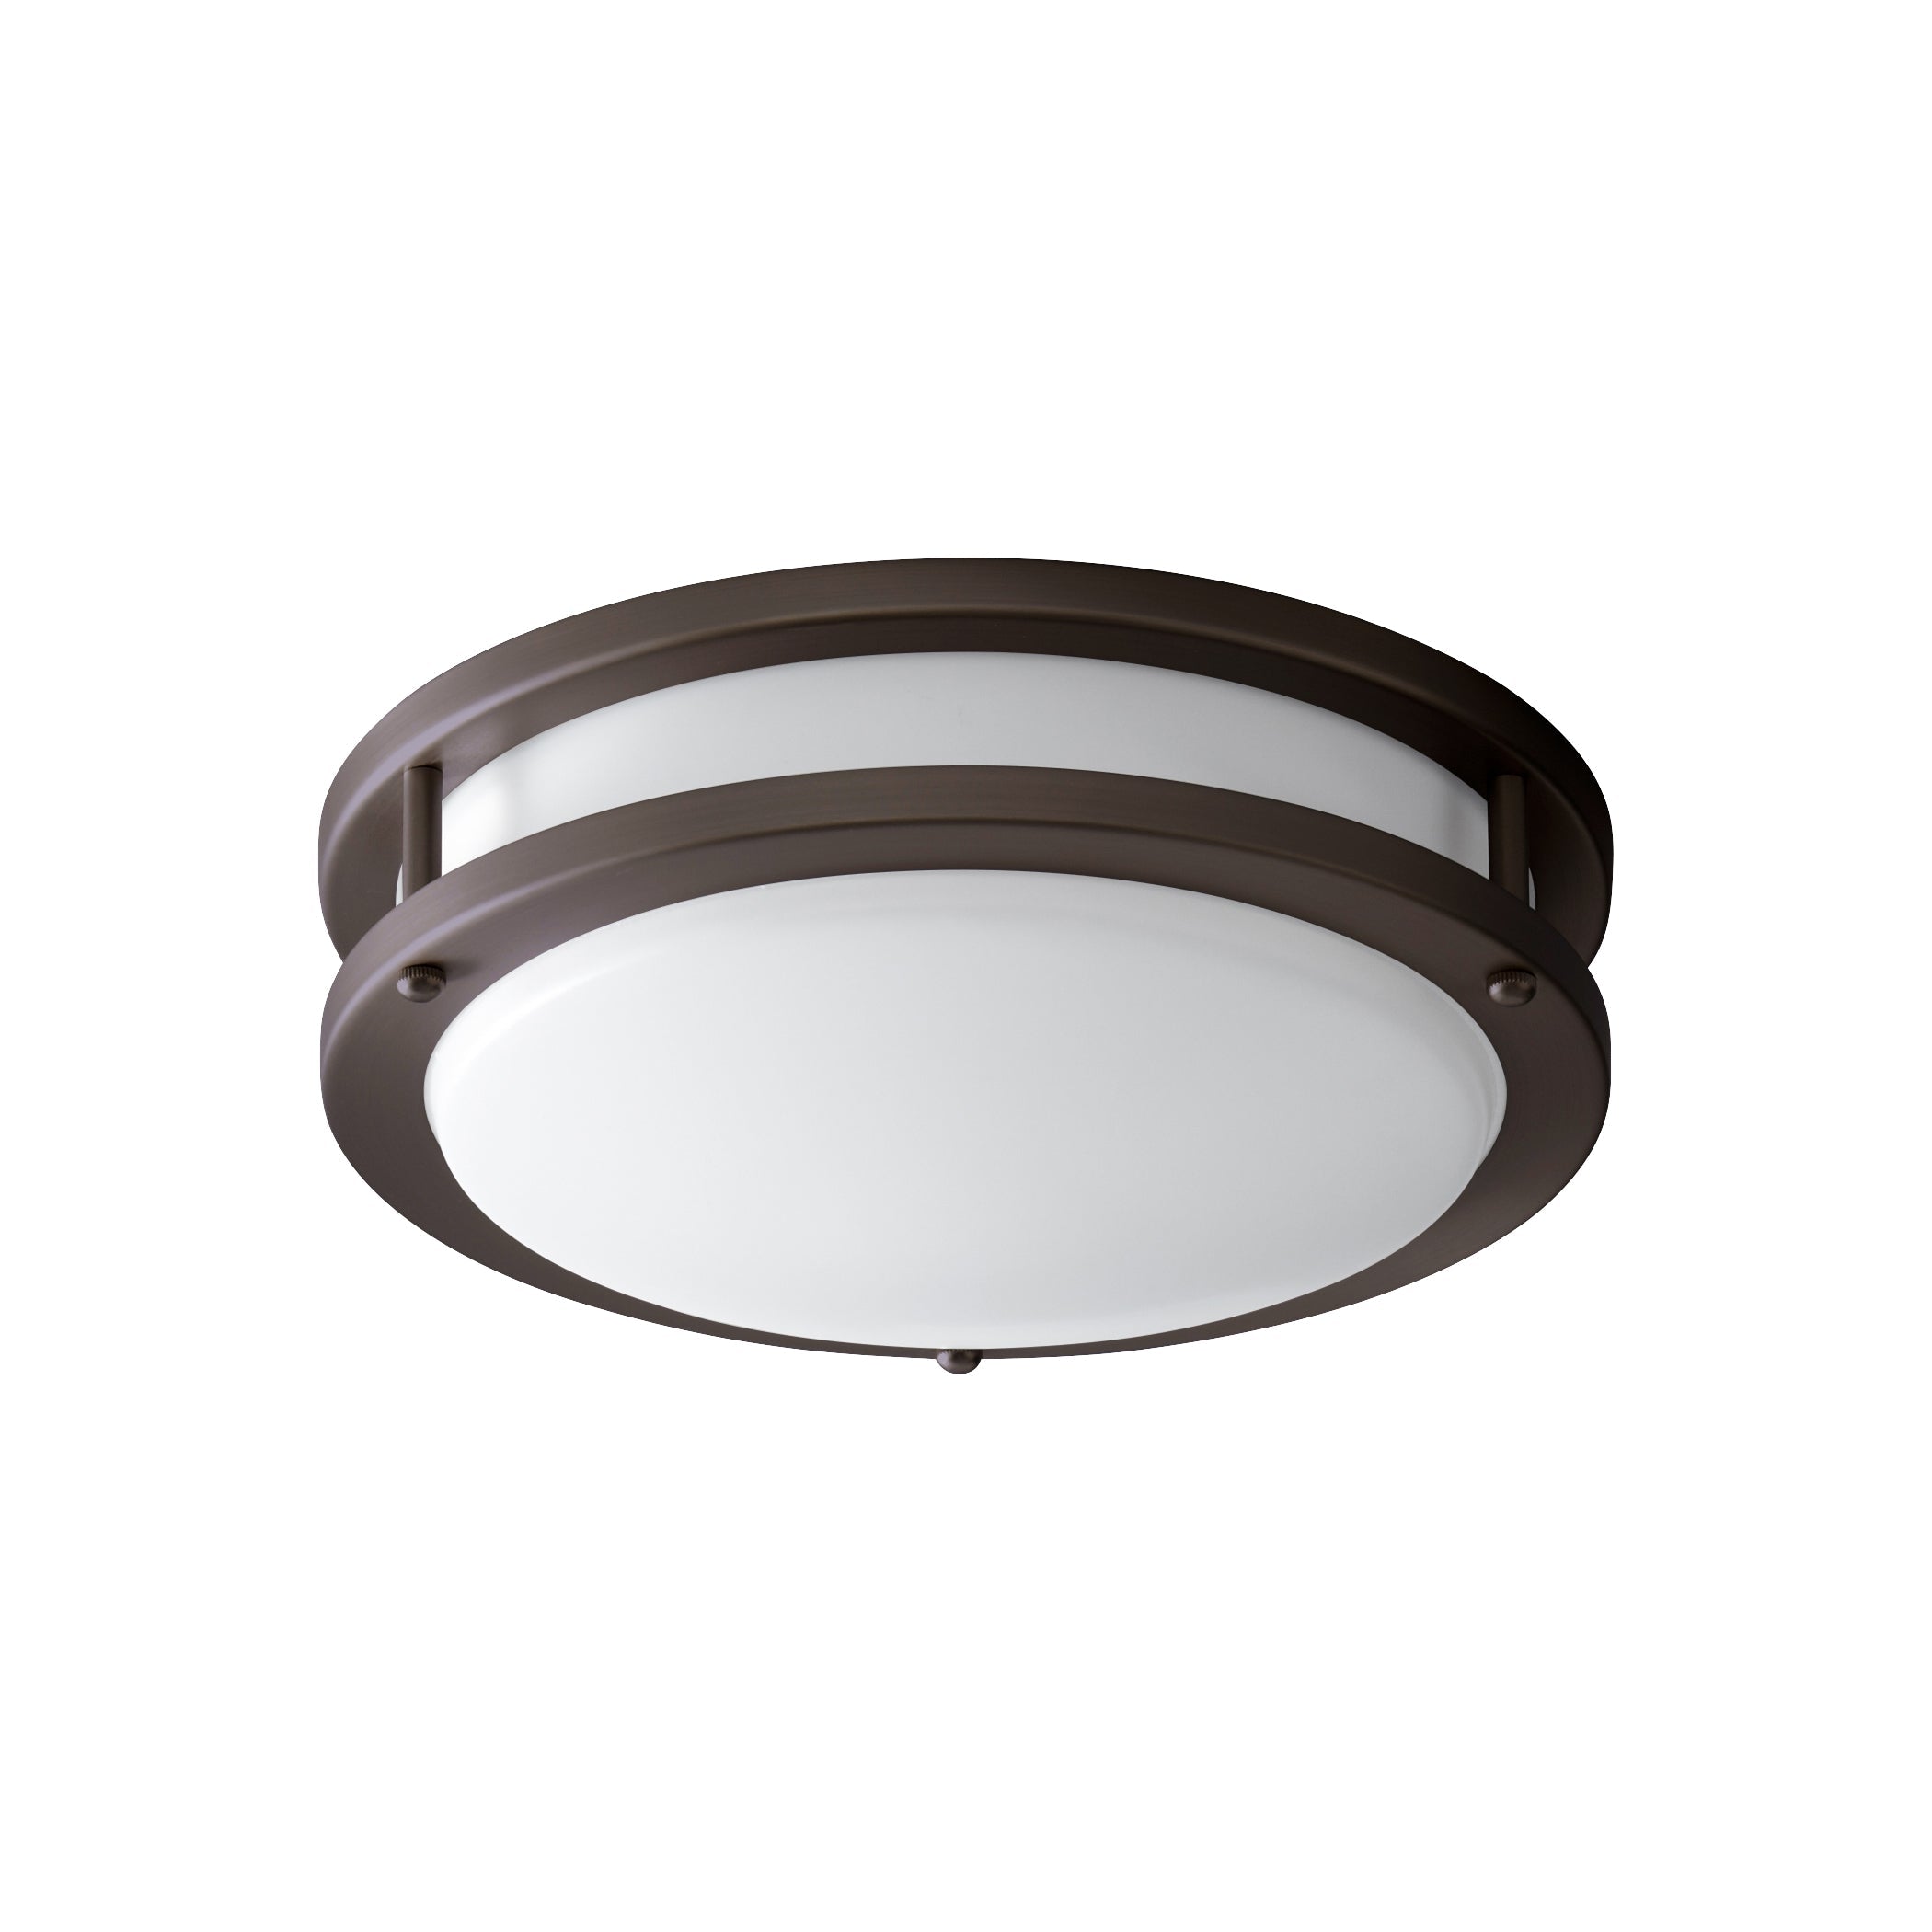 Oxygen Oracle 3-618-22 Modern Ceiling Mount - Oiled Bronze